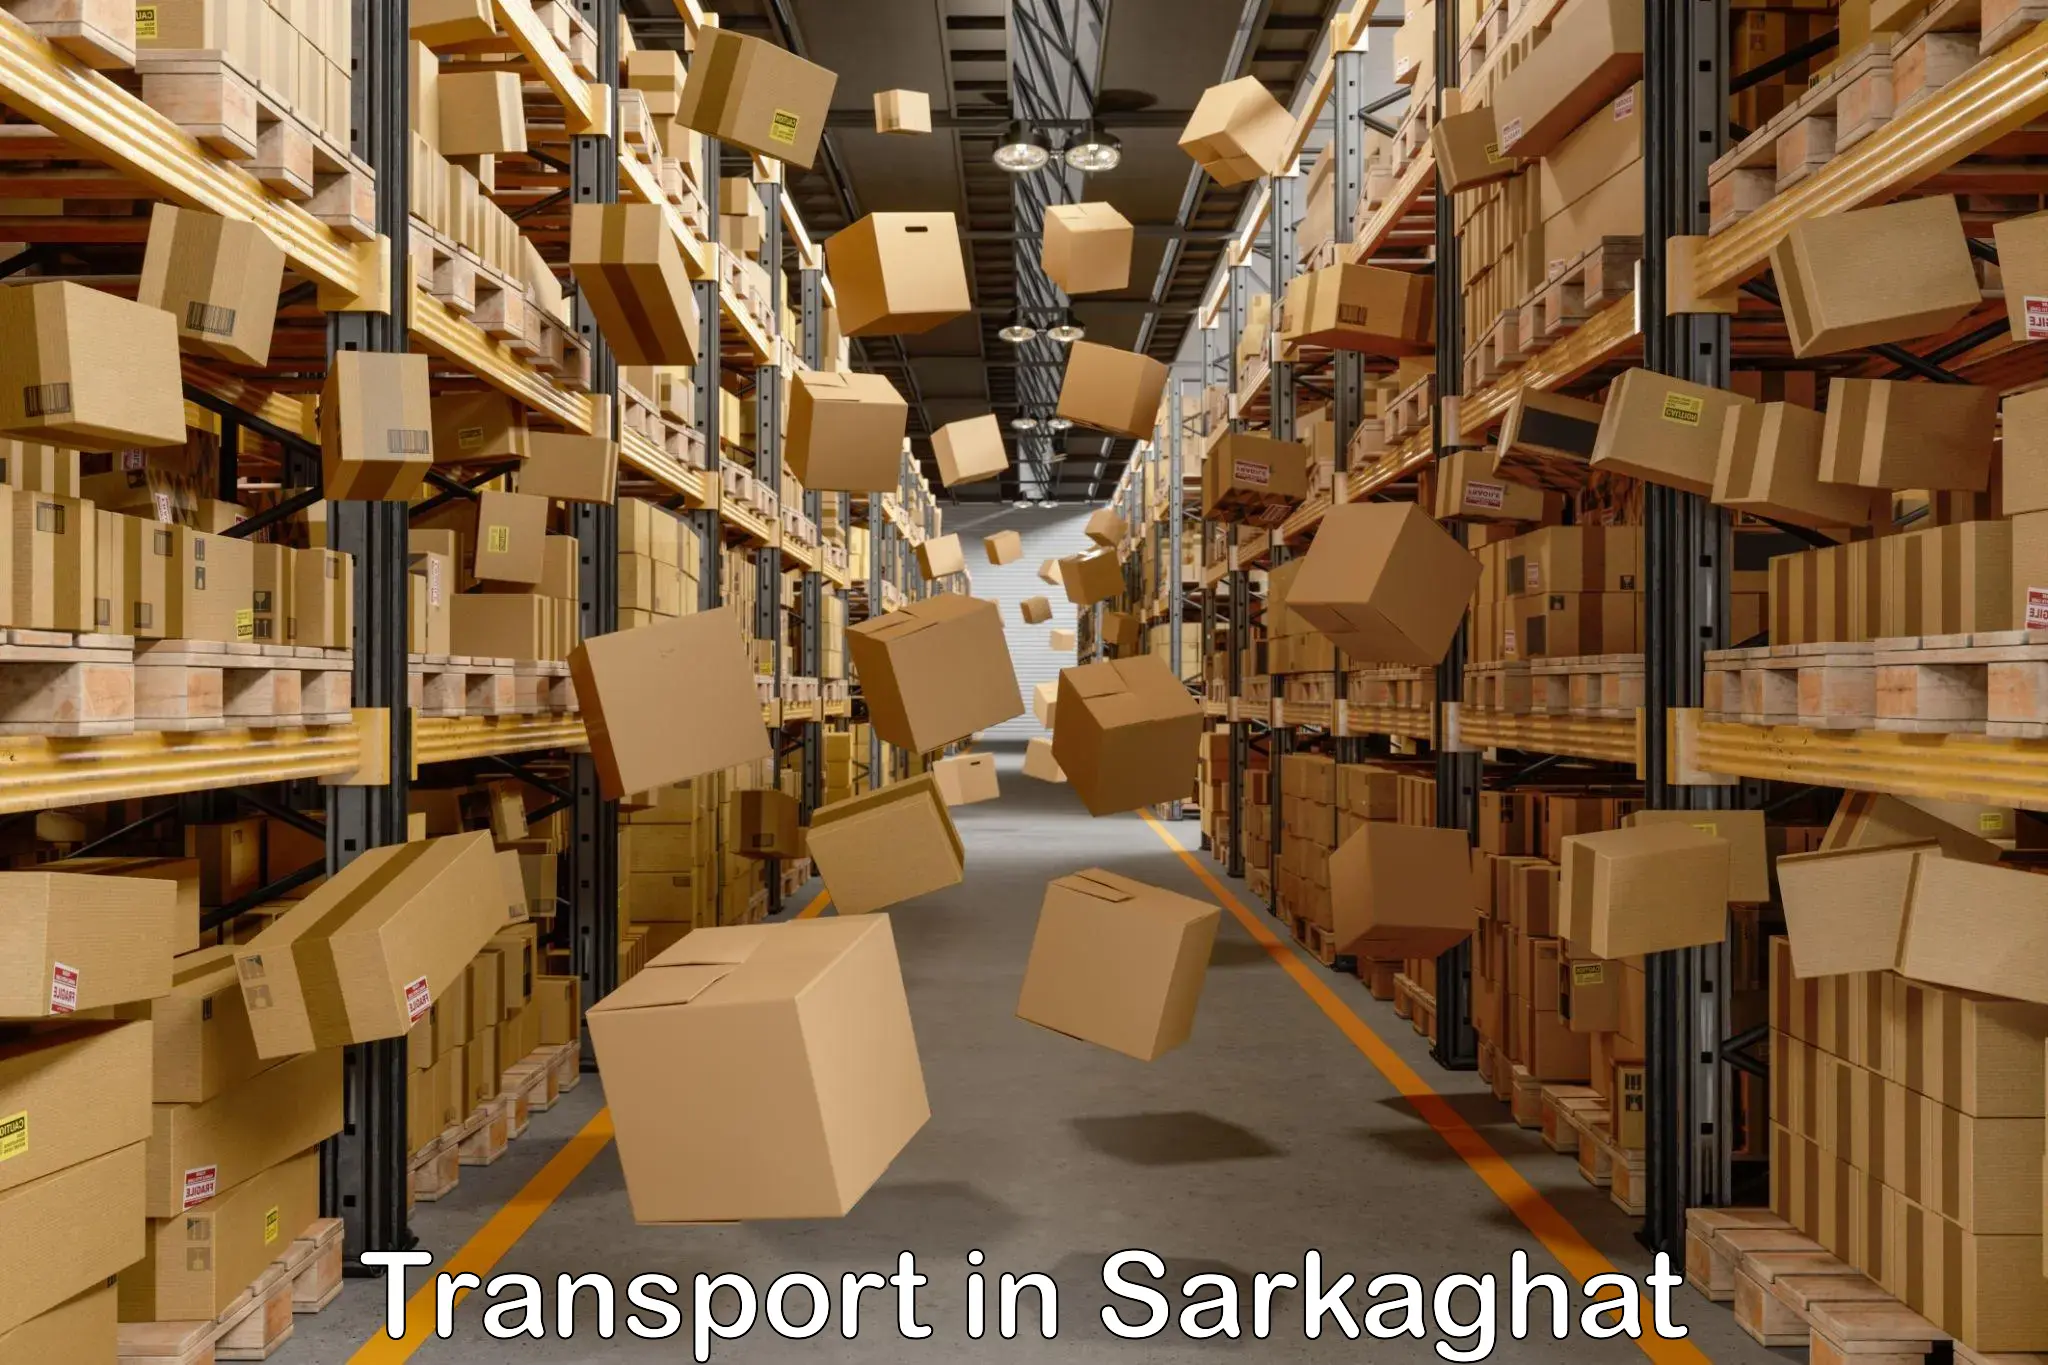 Part load transport service in India in Sarkaghat